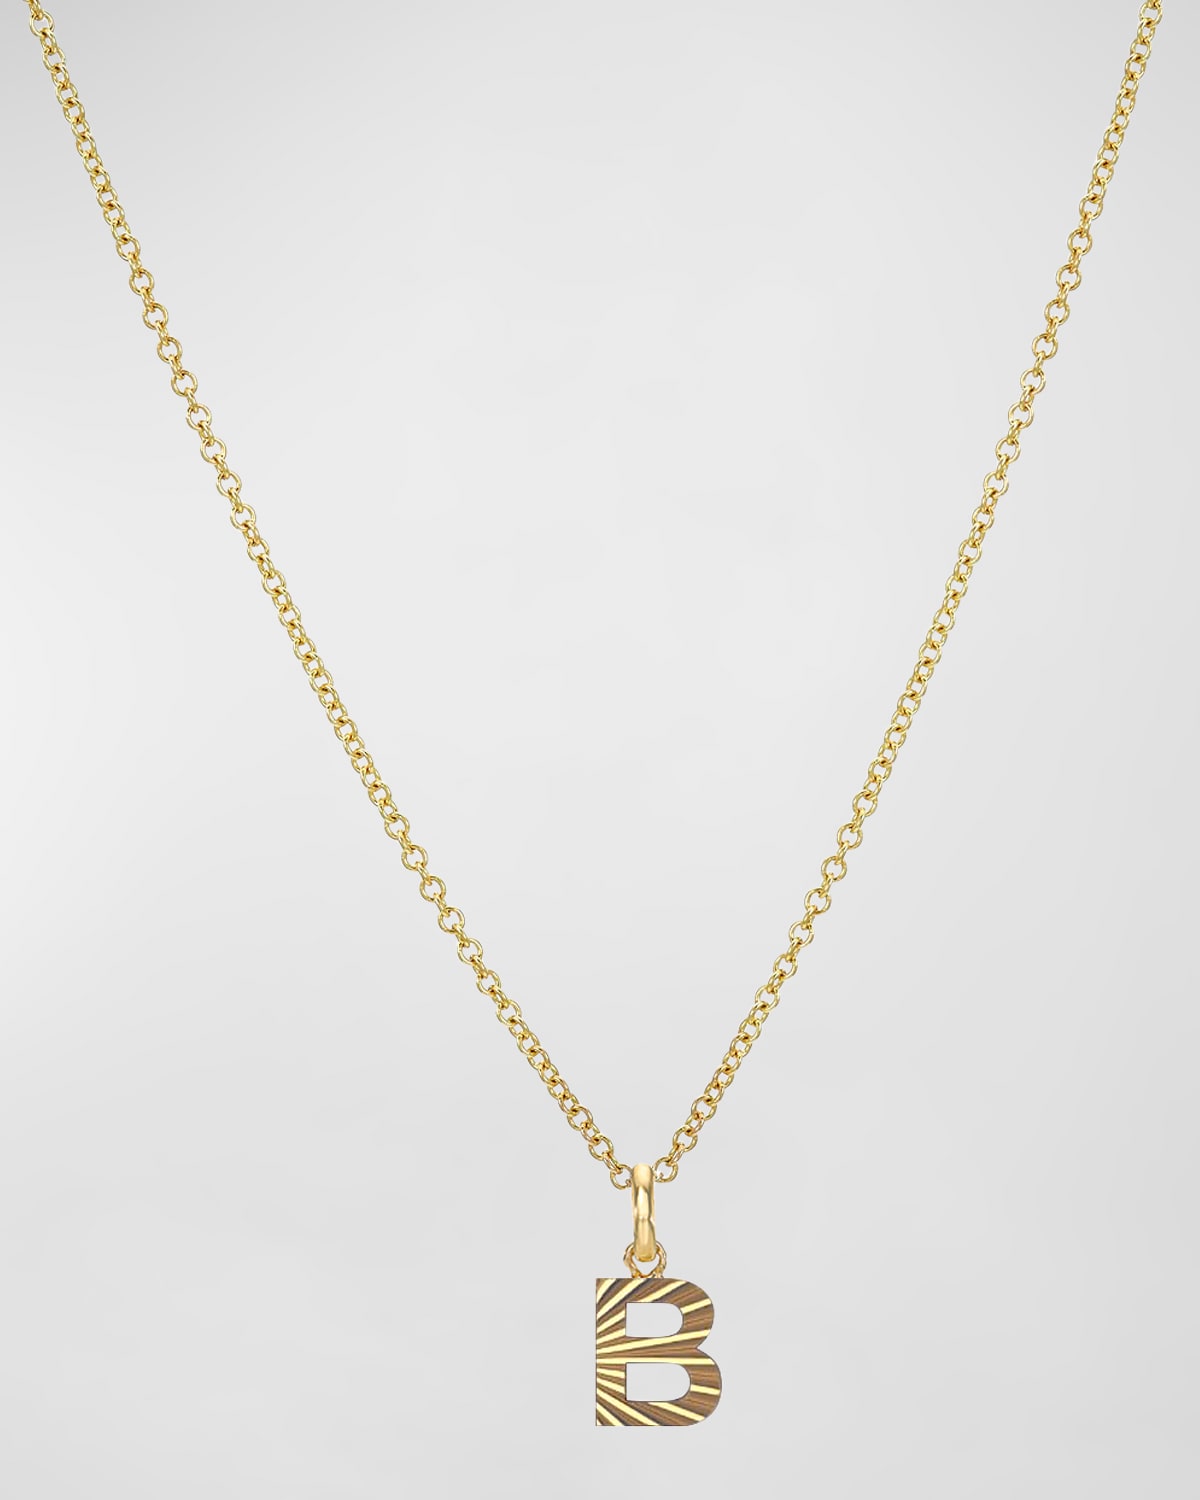 Zoe Lev Jewelry 14k Gold Initial Pendant Necklace In B